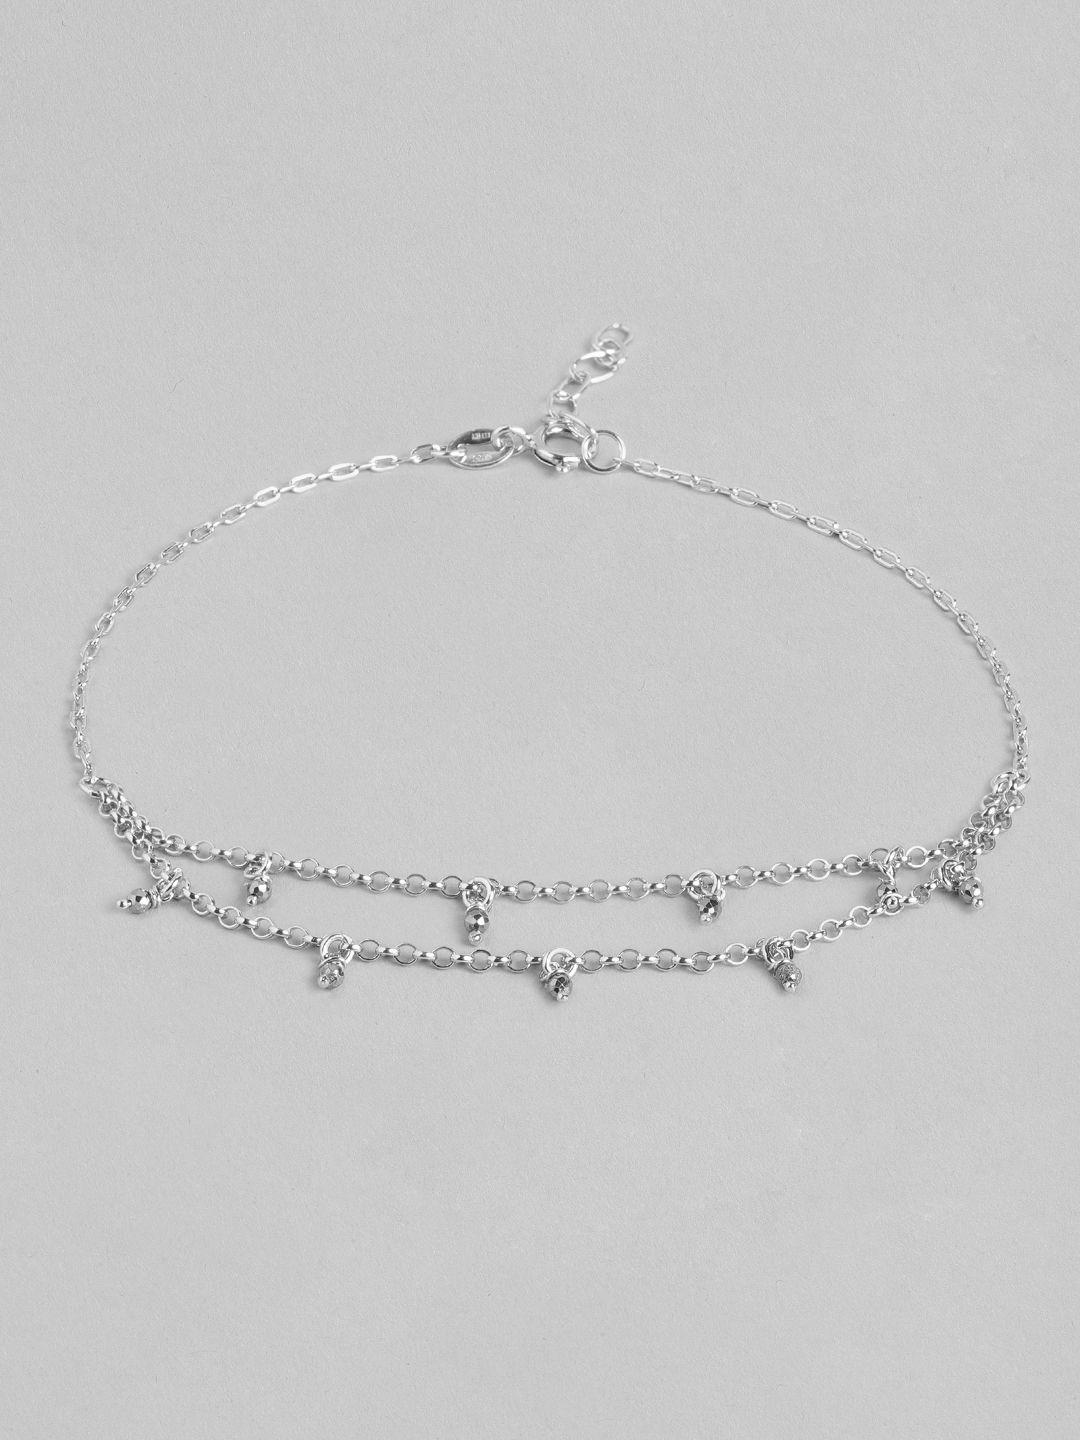 carlton london 925 sterling silver rhodium plated cz & glass bead chain adjustable anklet